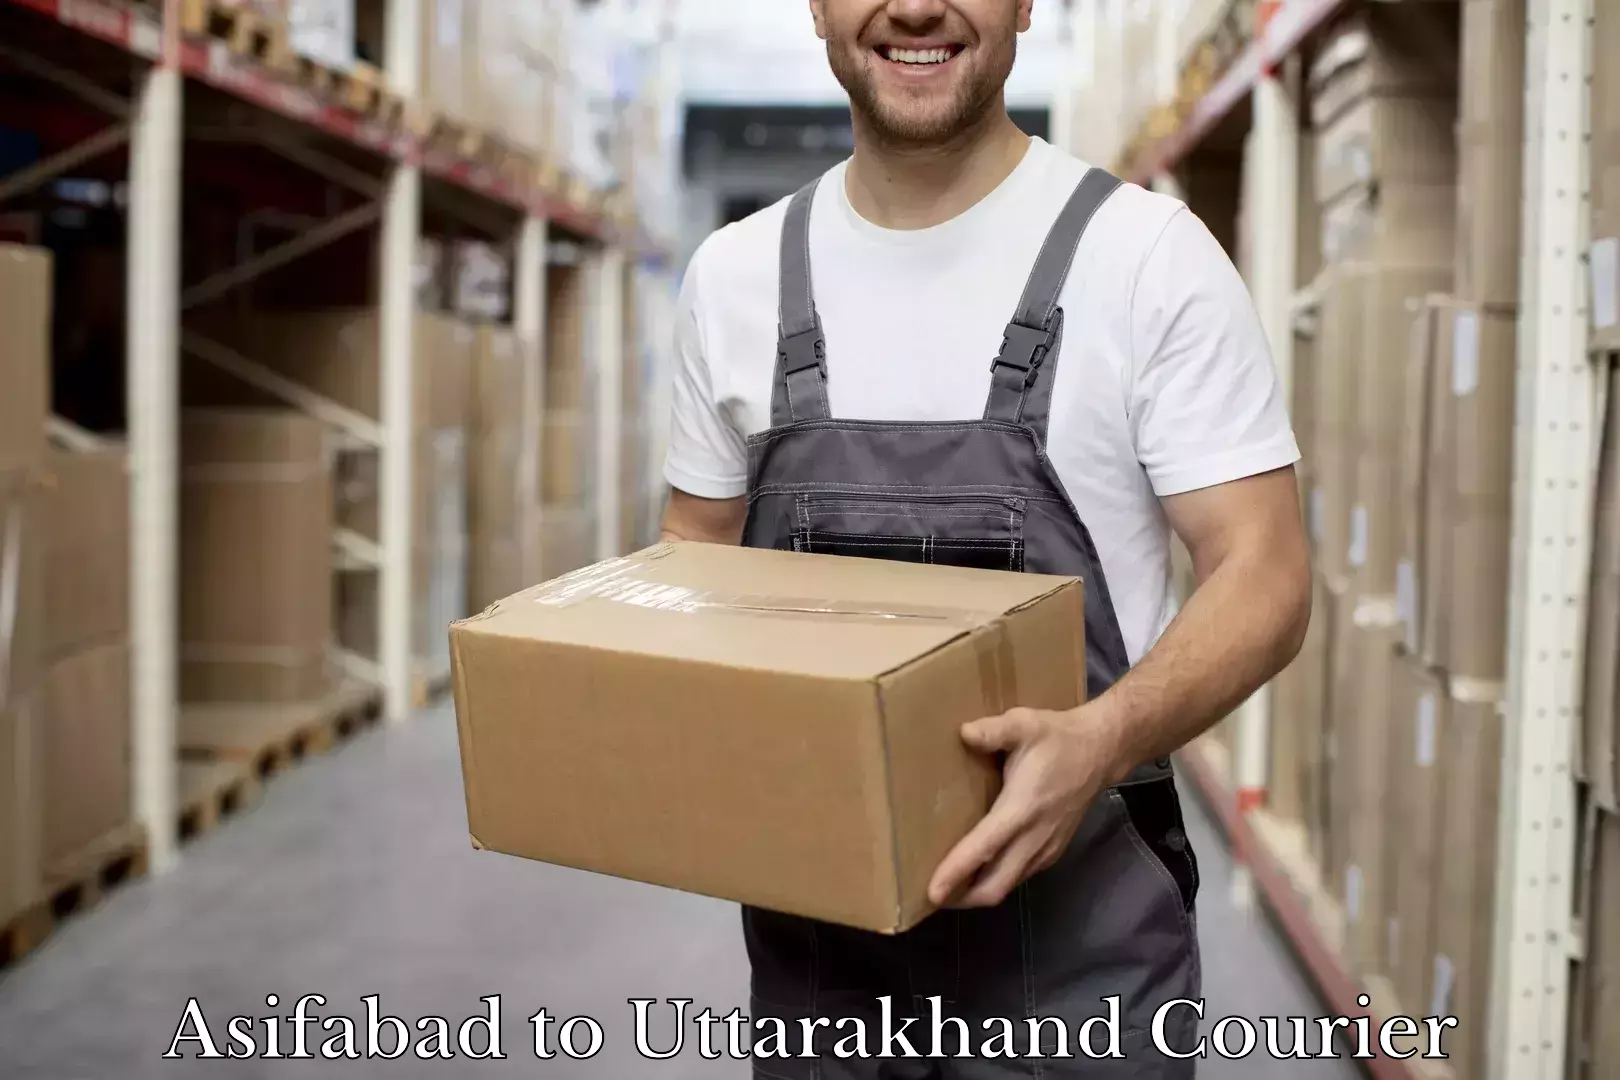 Luggage shipment specialists Asifabad to Dwarahat